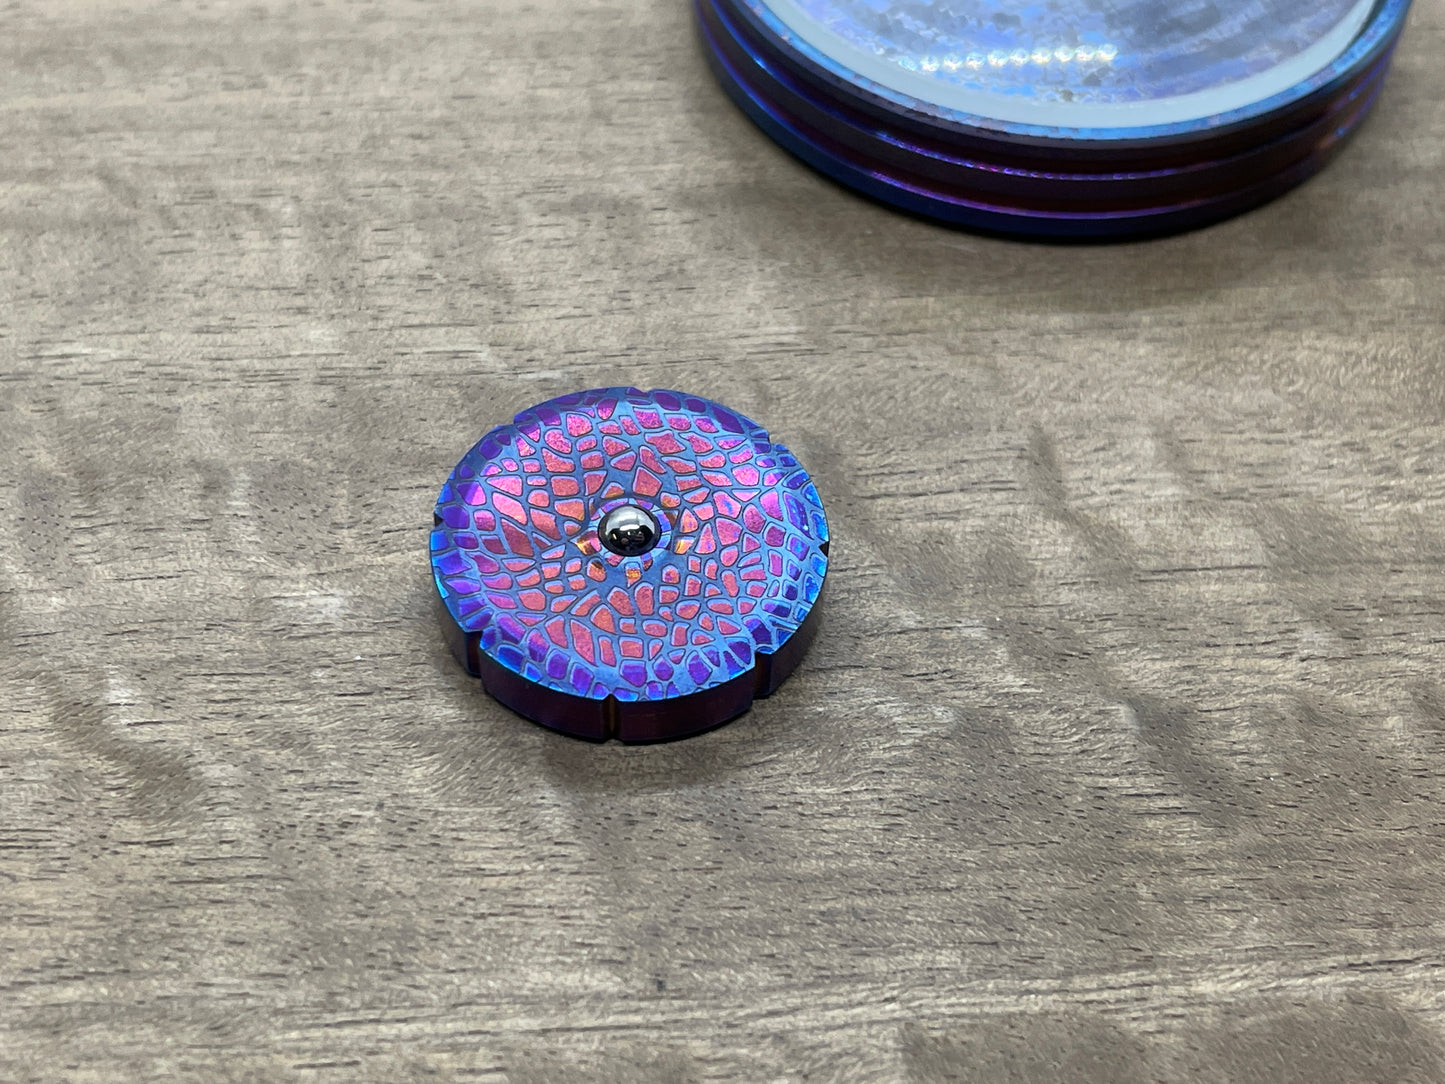 NEBULA Flamed Titanium Spinning Worry Coin Spinning Top